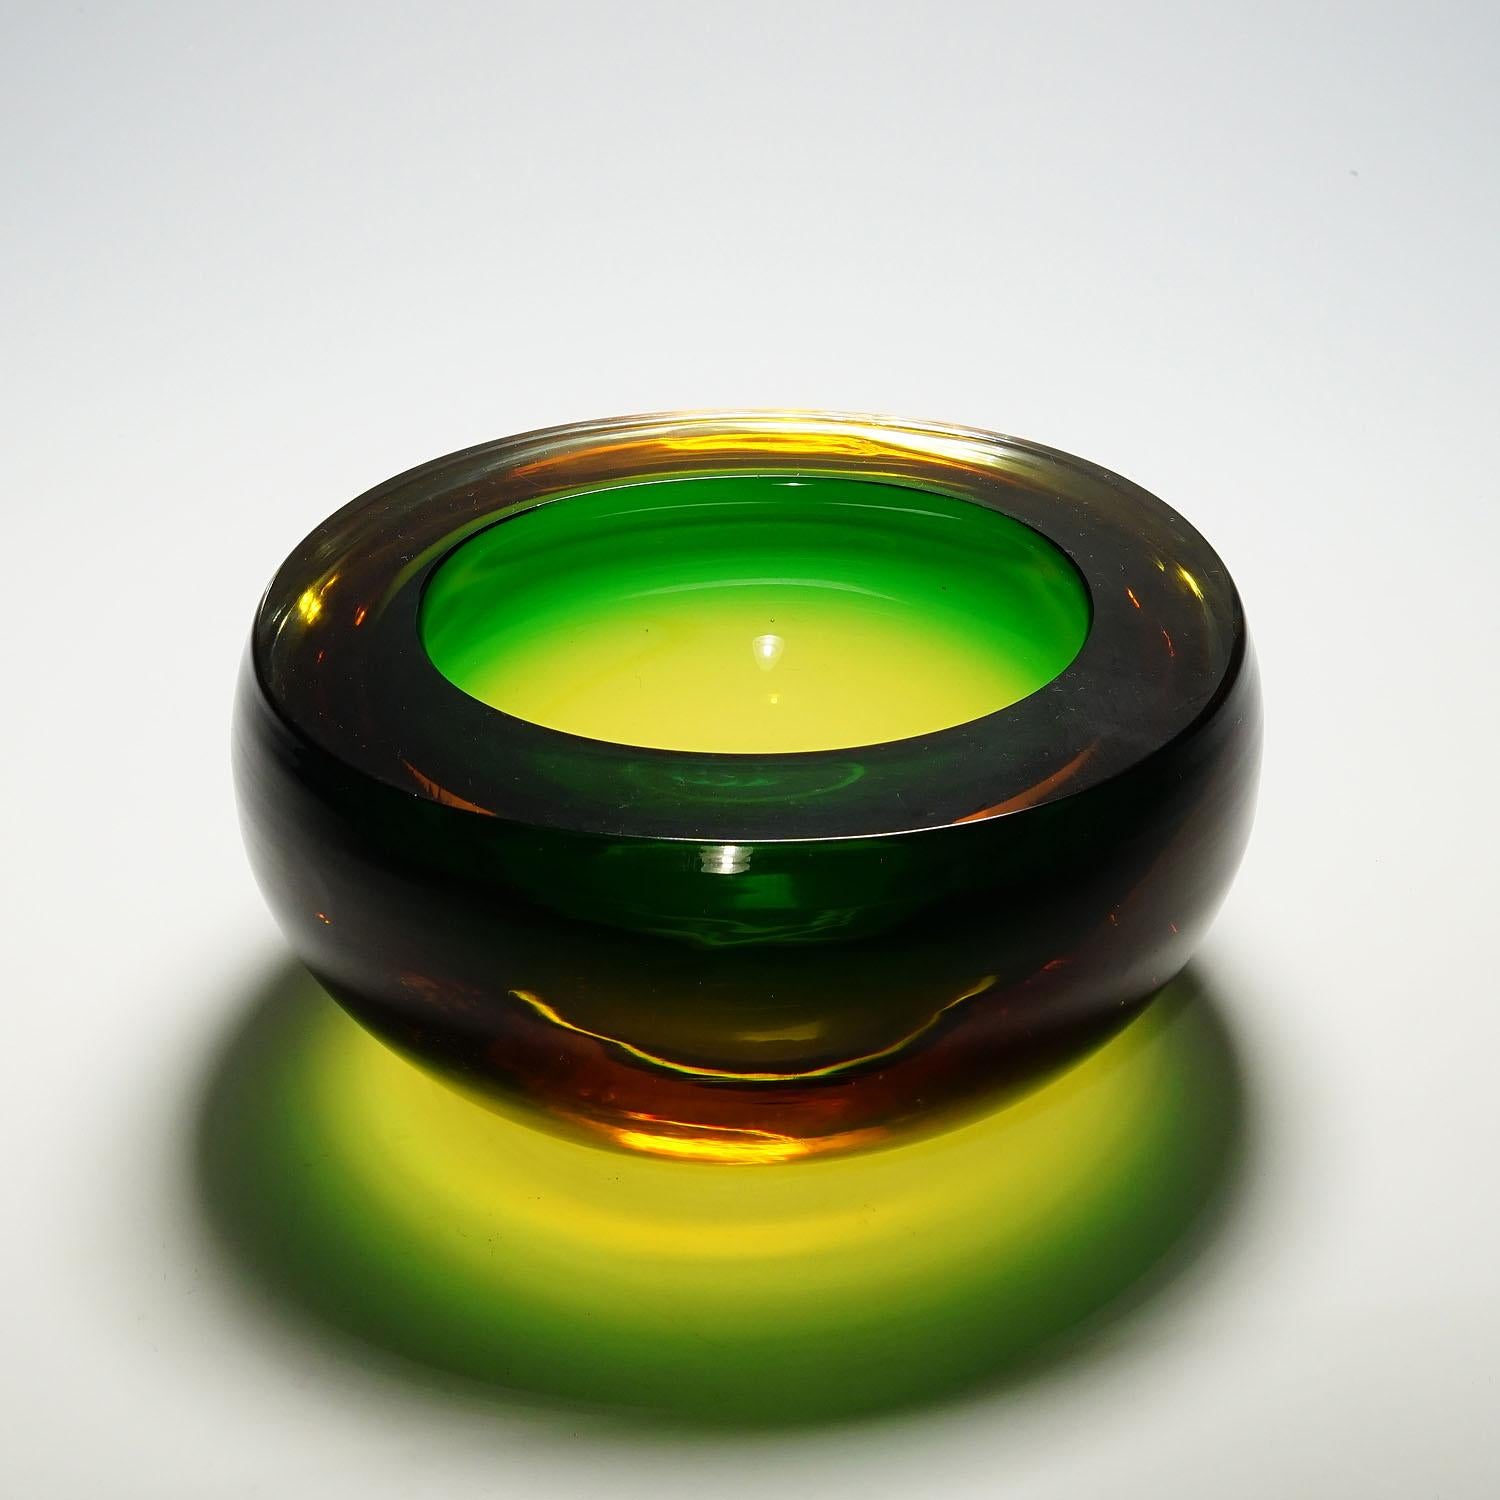 Hand-Crafted Midcentury Modern Murano Green and Amber Sommerso Art Glass Bowl 1960s For Sale